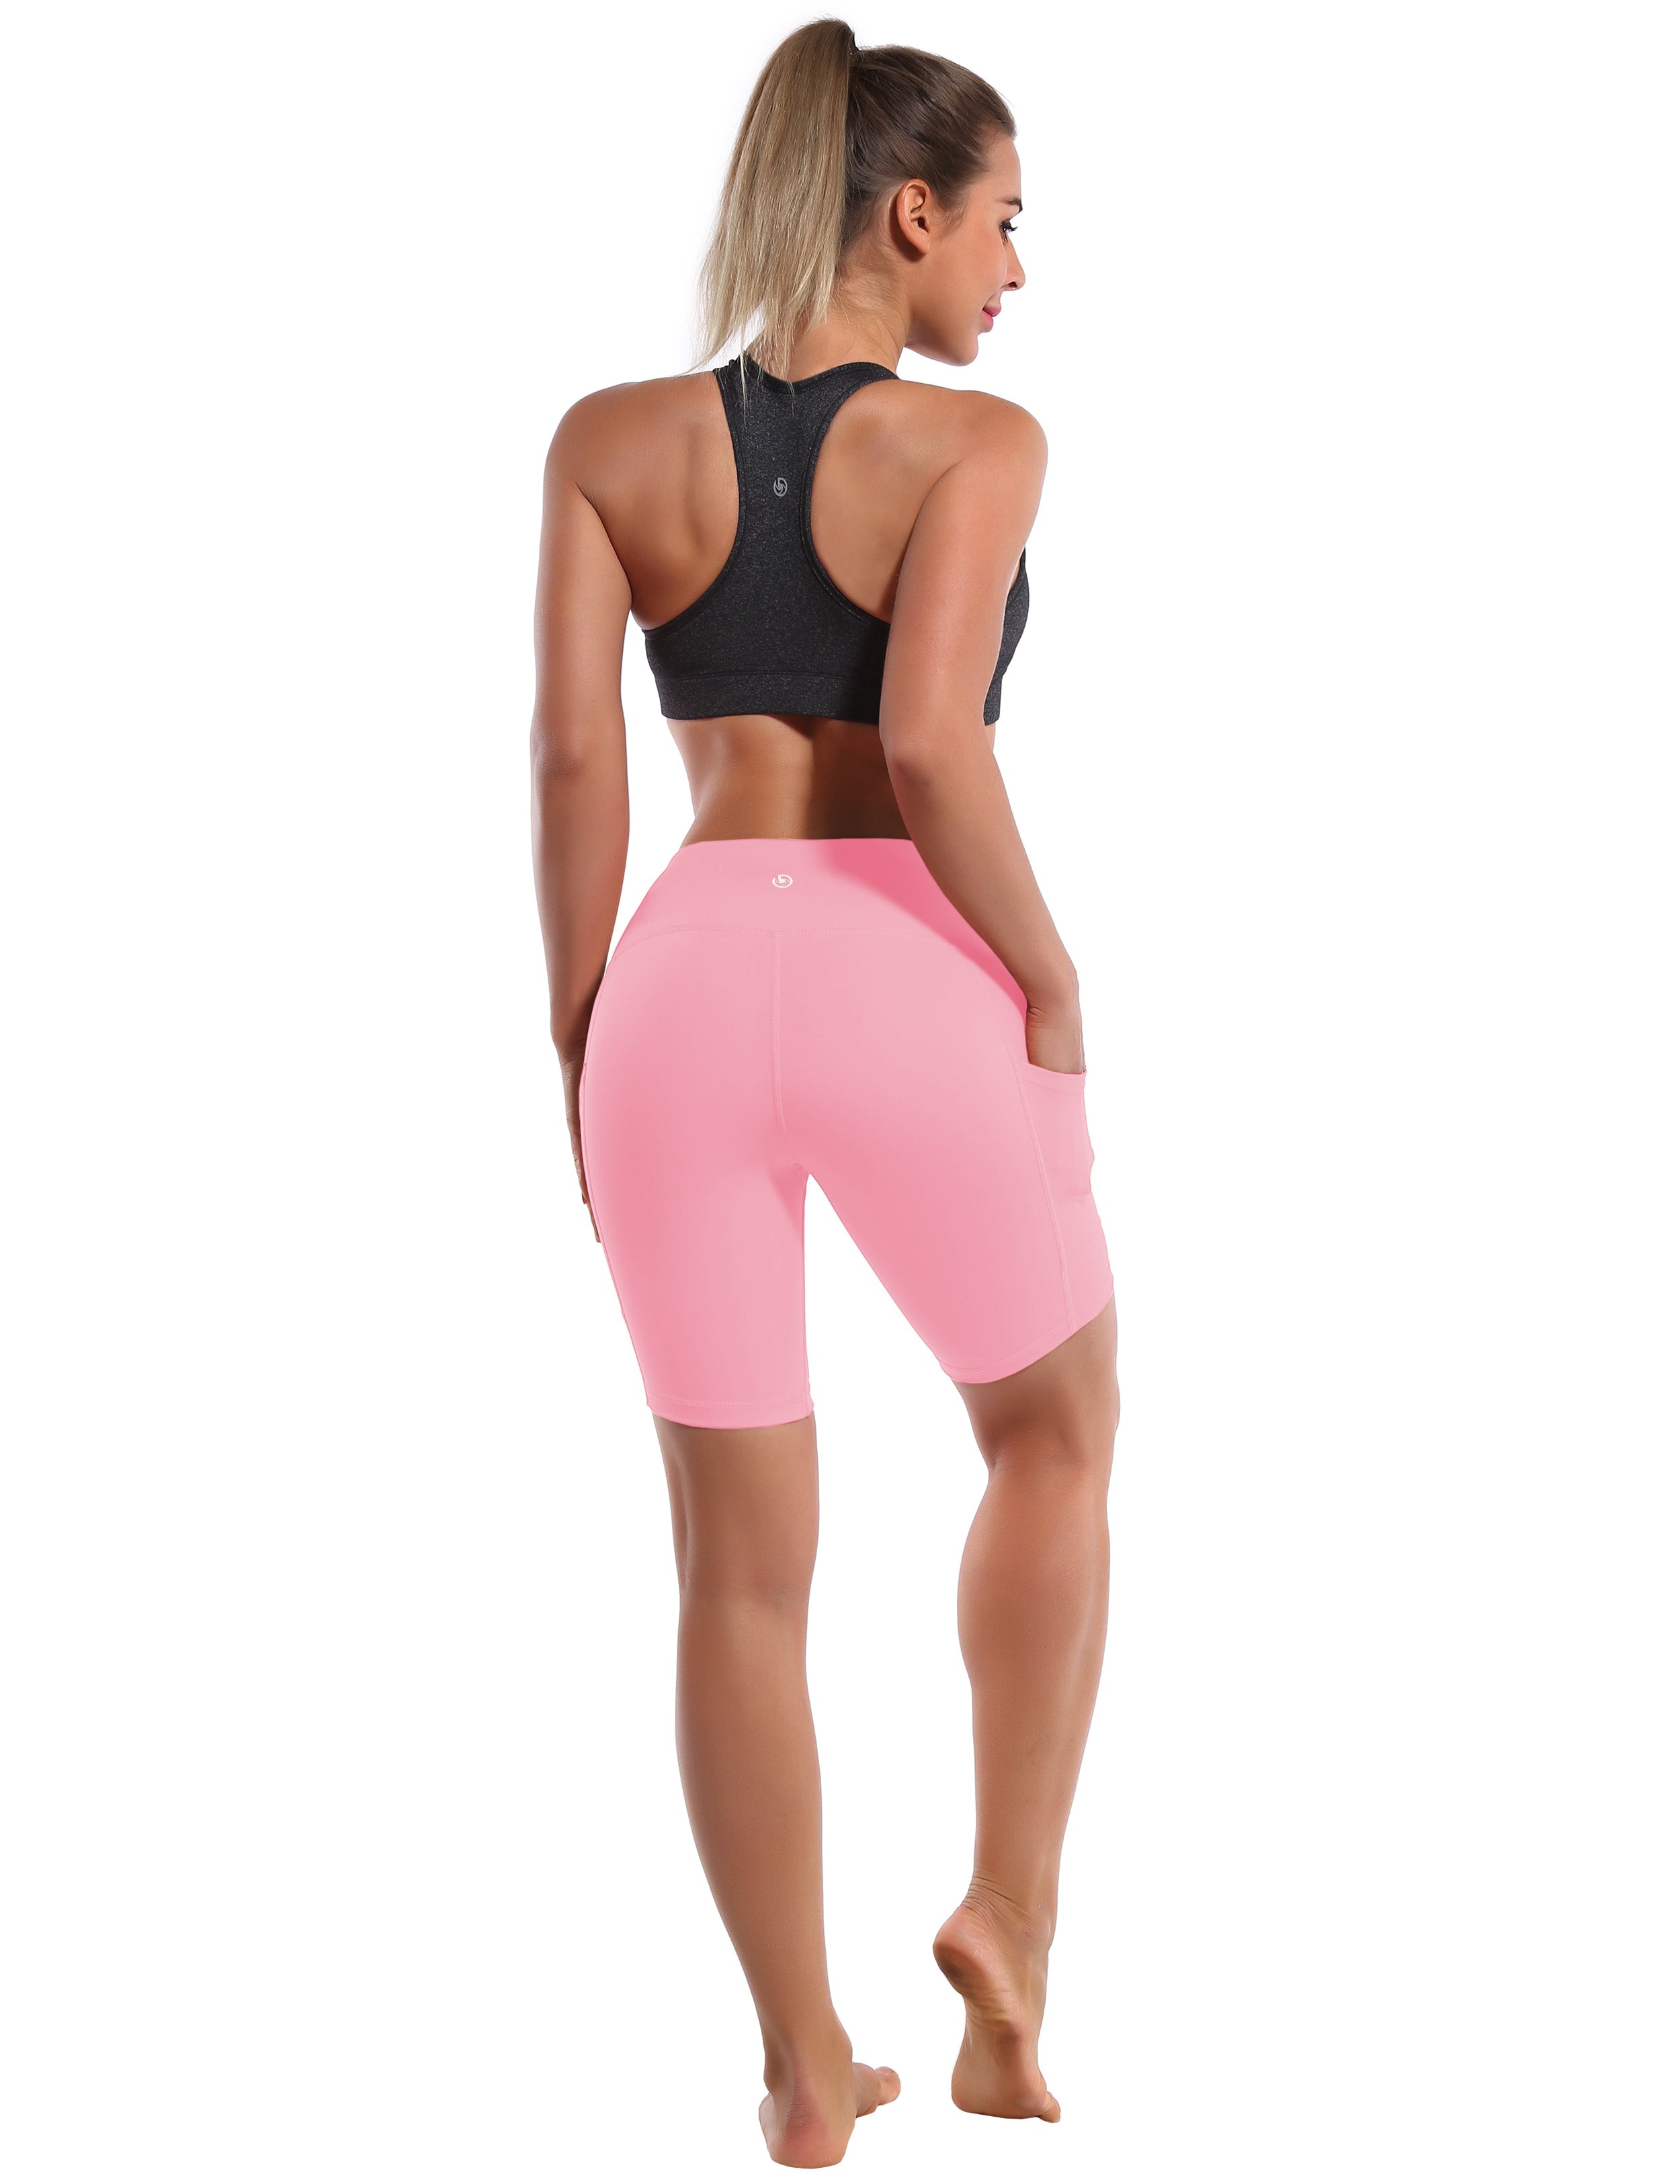 8" Side Pockets Biking Shorts lemonadepink Sleek, soft, smooth and totally comfortable: our newest style is here. Softest-ever fabric High elasticity High density 4-way stretch Fabric doesn't attract lint easily No see-through Moisture-wicking Machine wash 75% Nylon, 25% Spandex